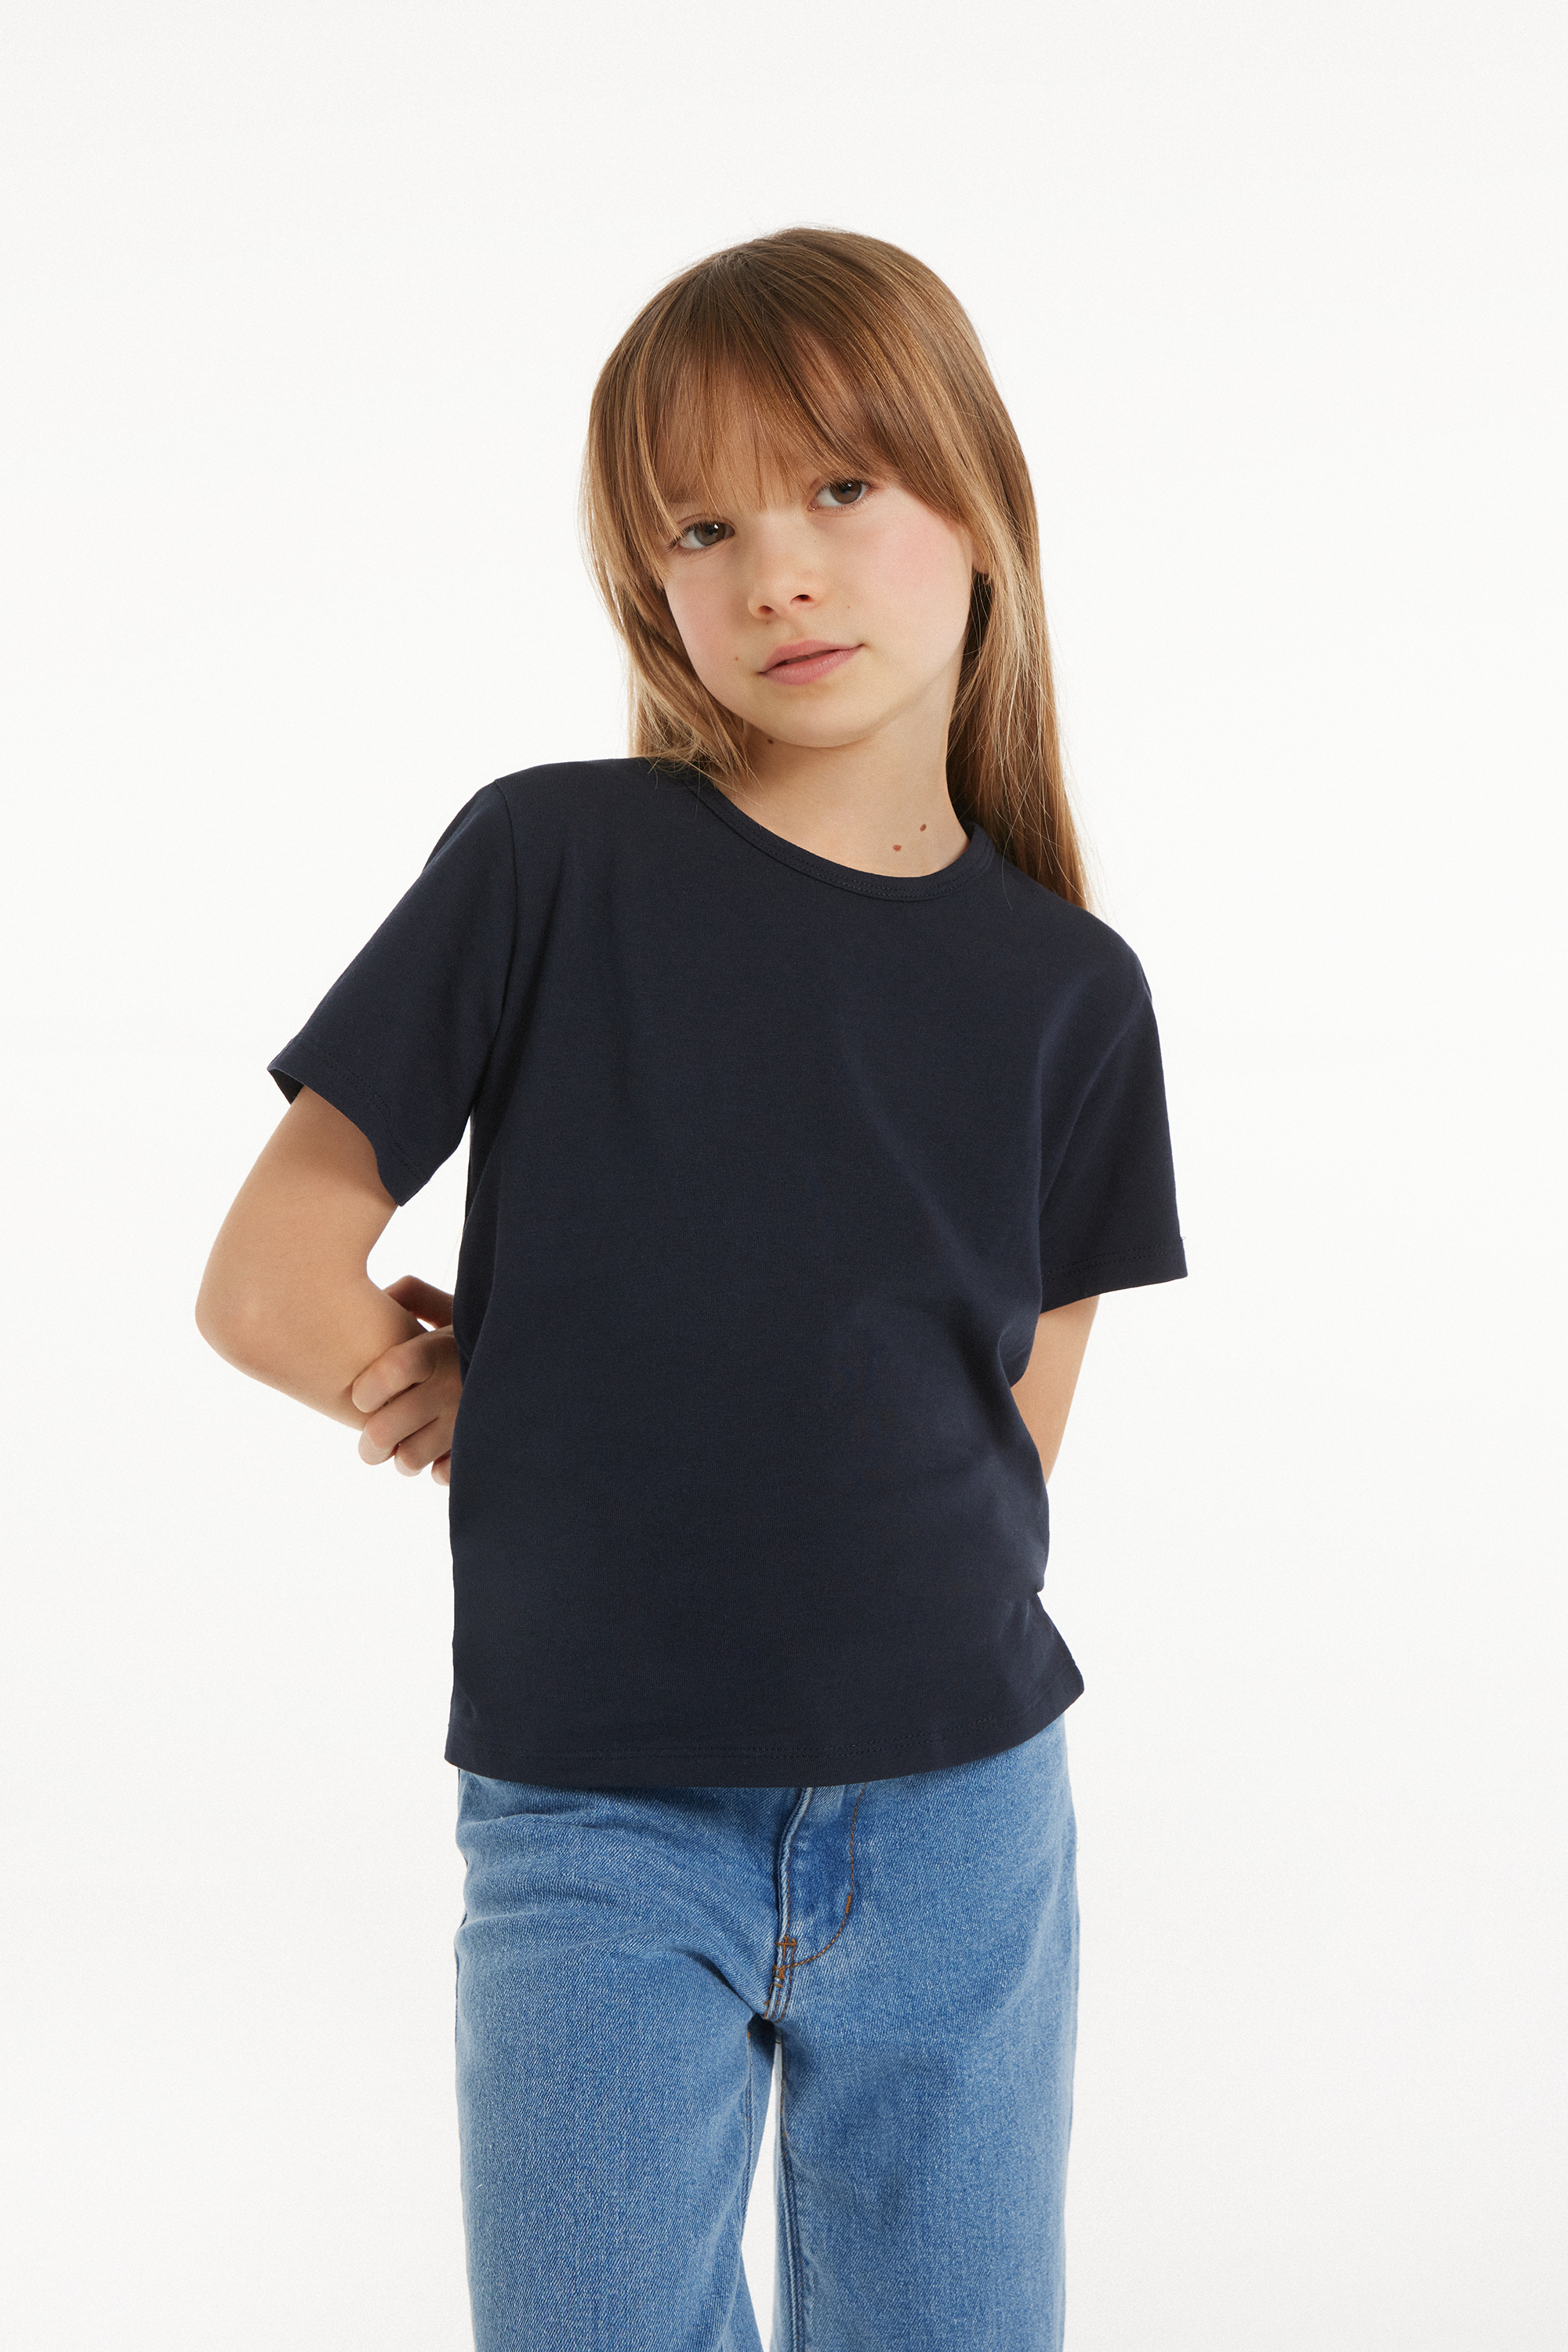 Unisex Kids’ Basic Stretch Cotton T-Shirt with Rounded Neck